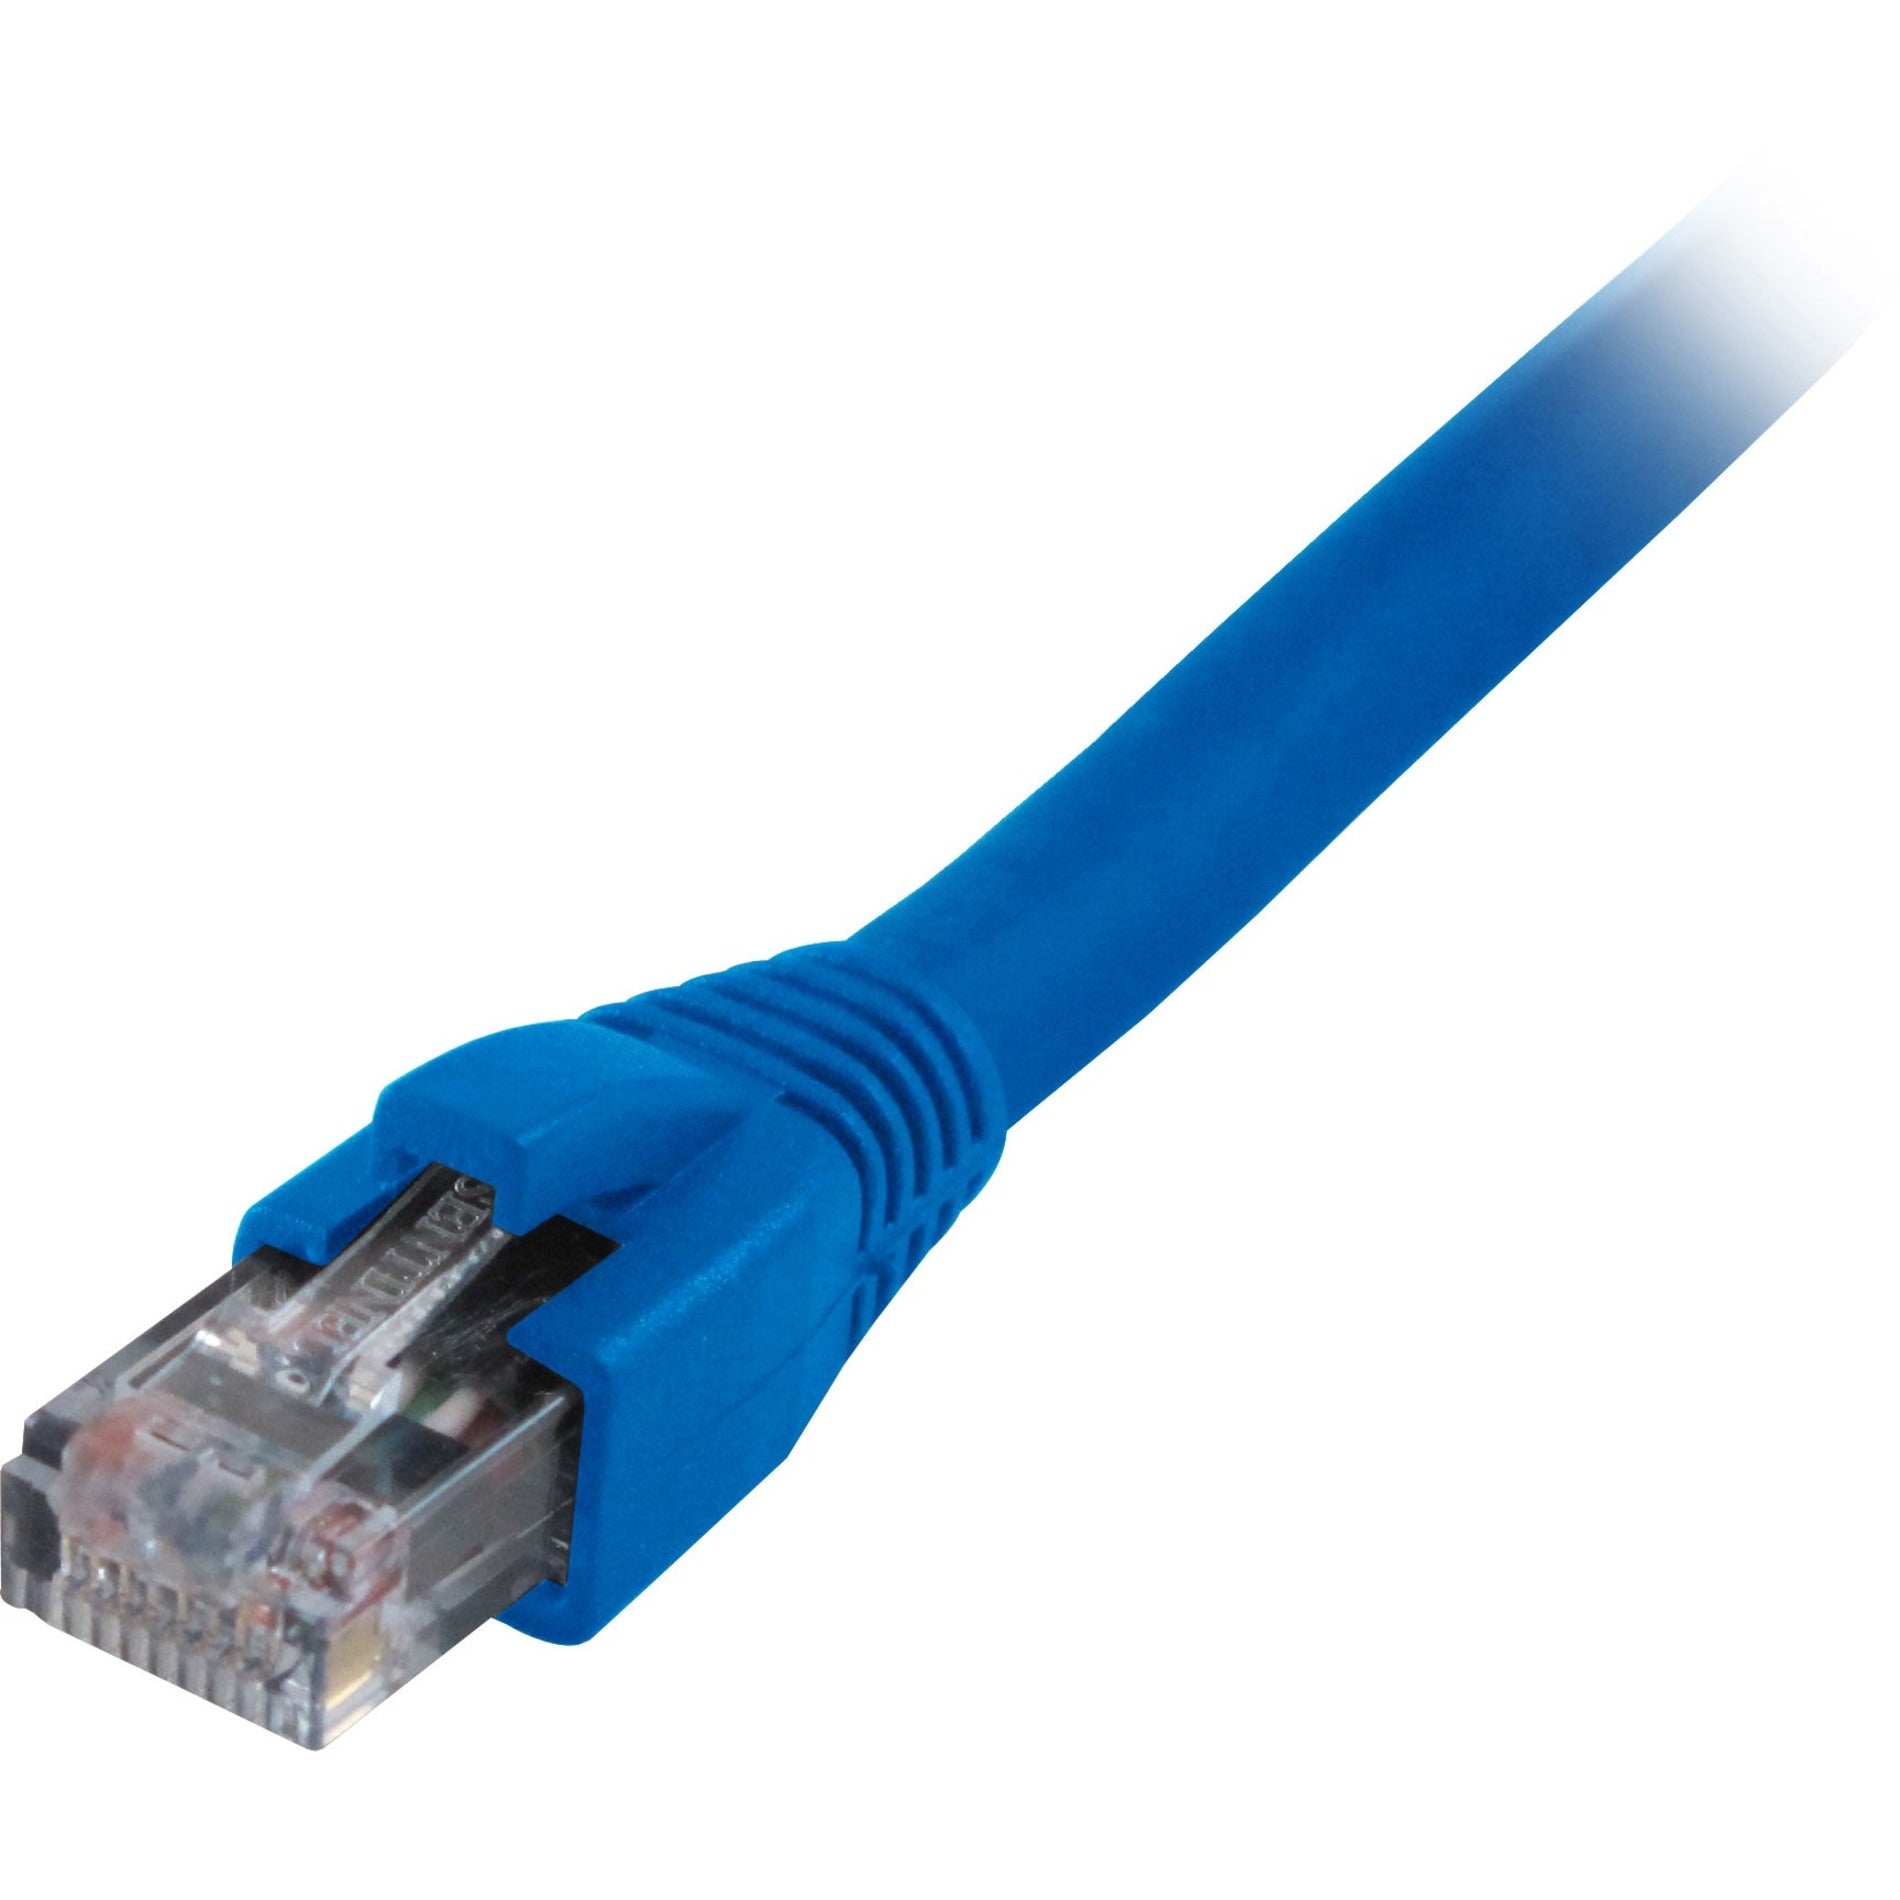 Comprehensive CAT5-350-5BLU Cat5e 350 Mhz Snagless Patch Cable 5ft Blue, Lifetime Warranty, 1 Gbit/s Data Transfer Rate